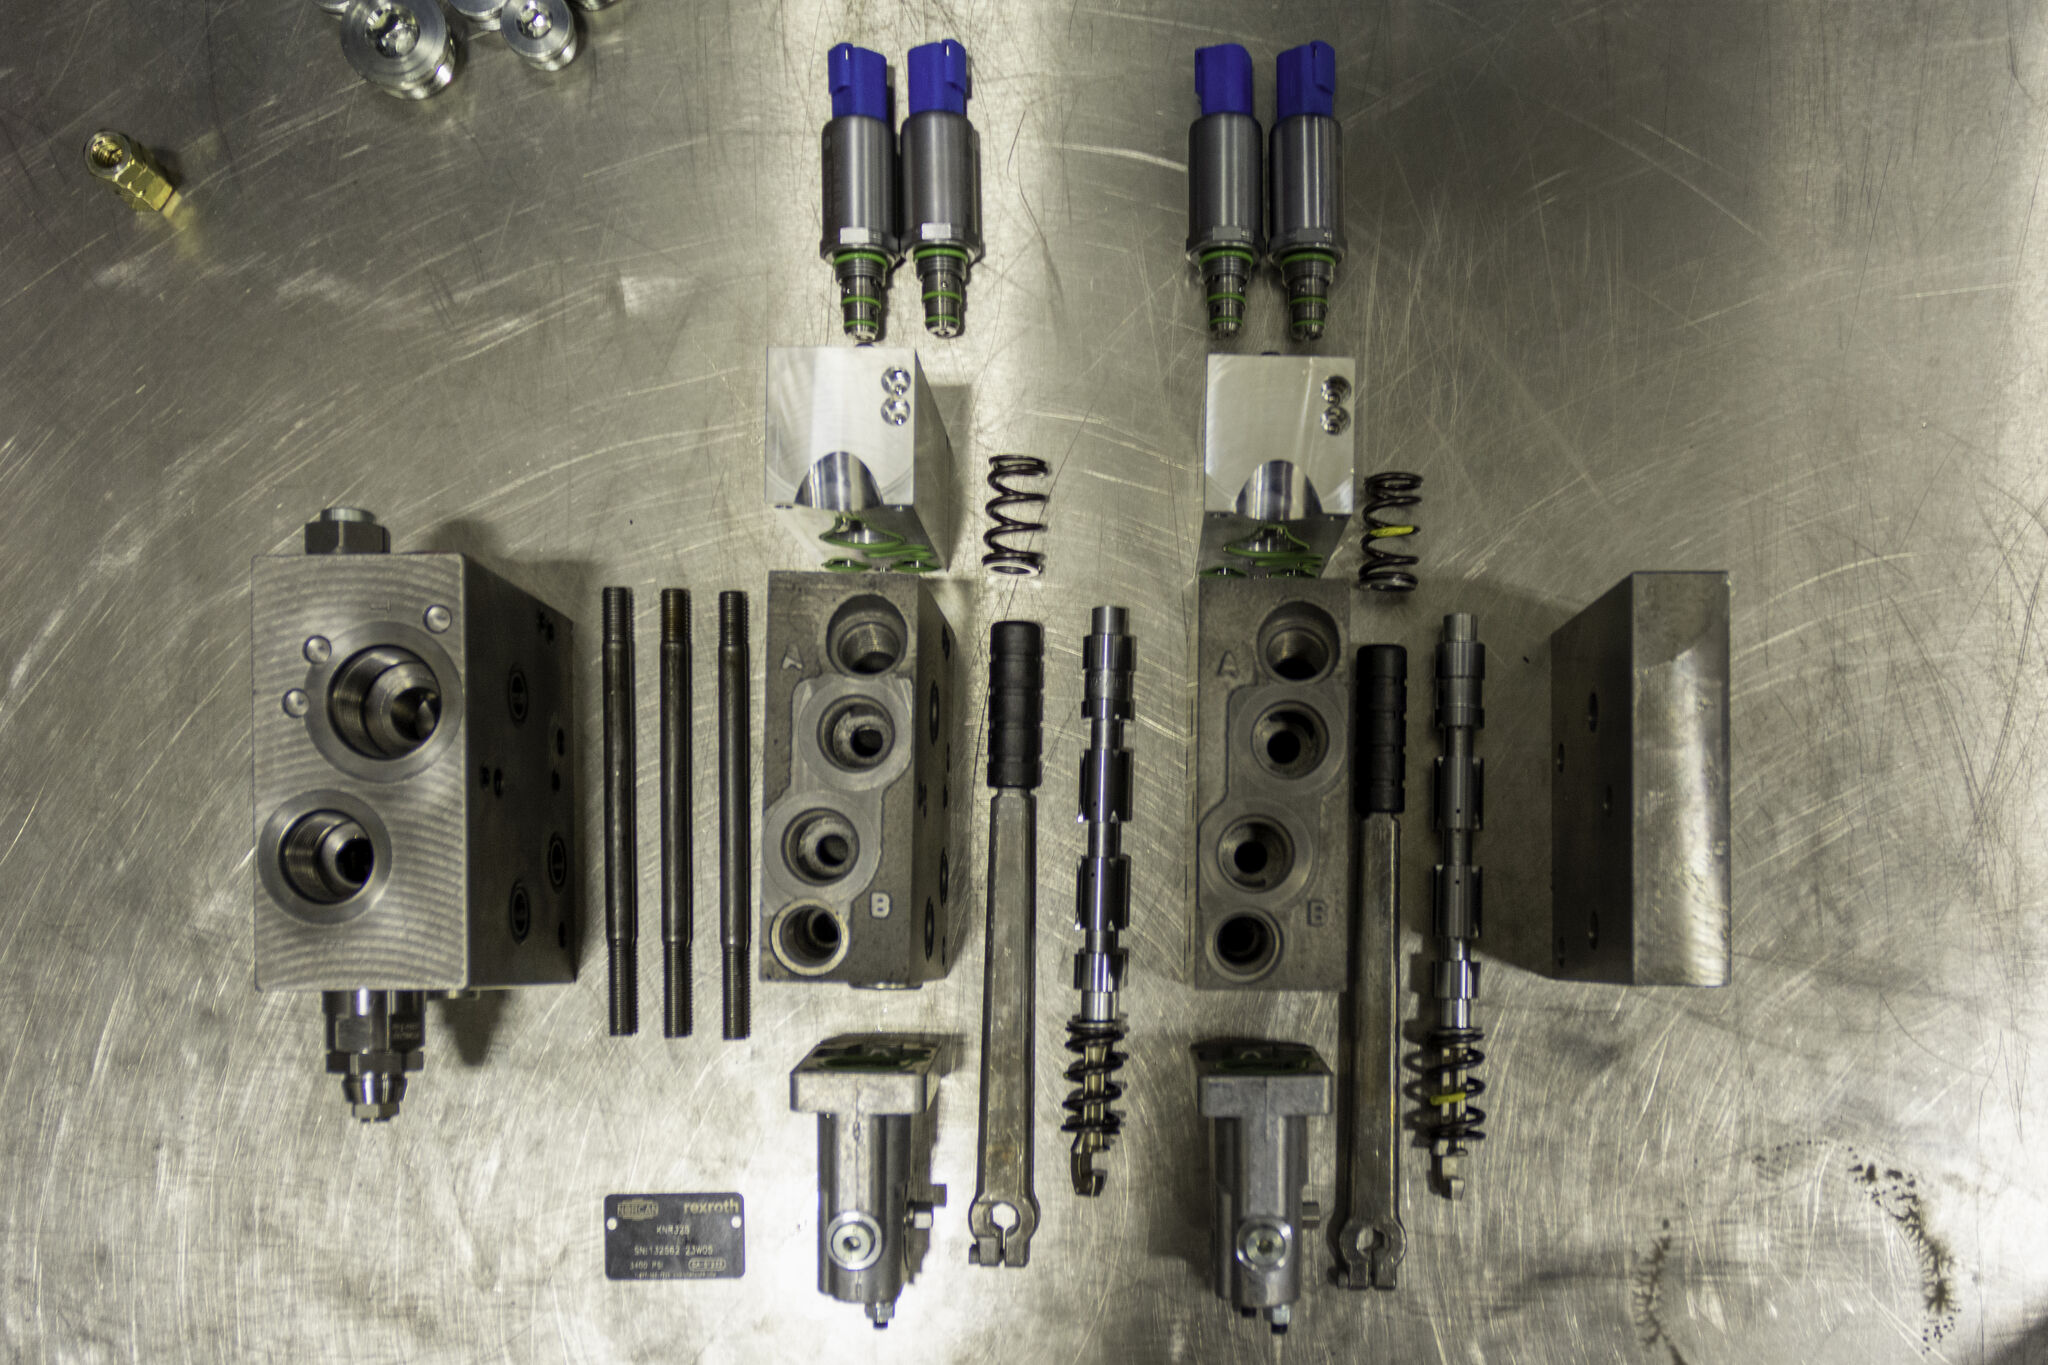 Power and Versatility of Rexroth's M4 Valves